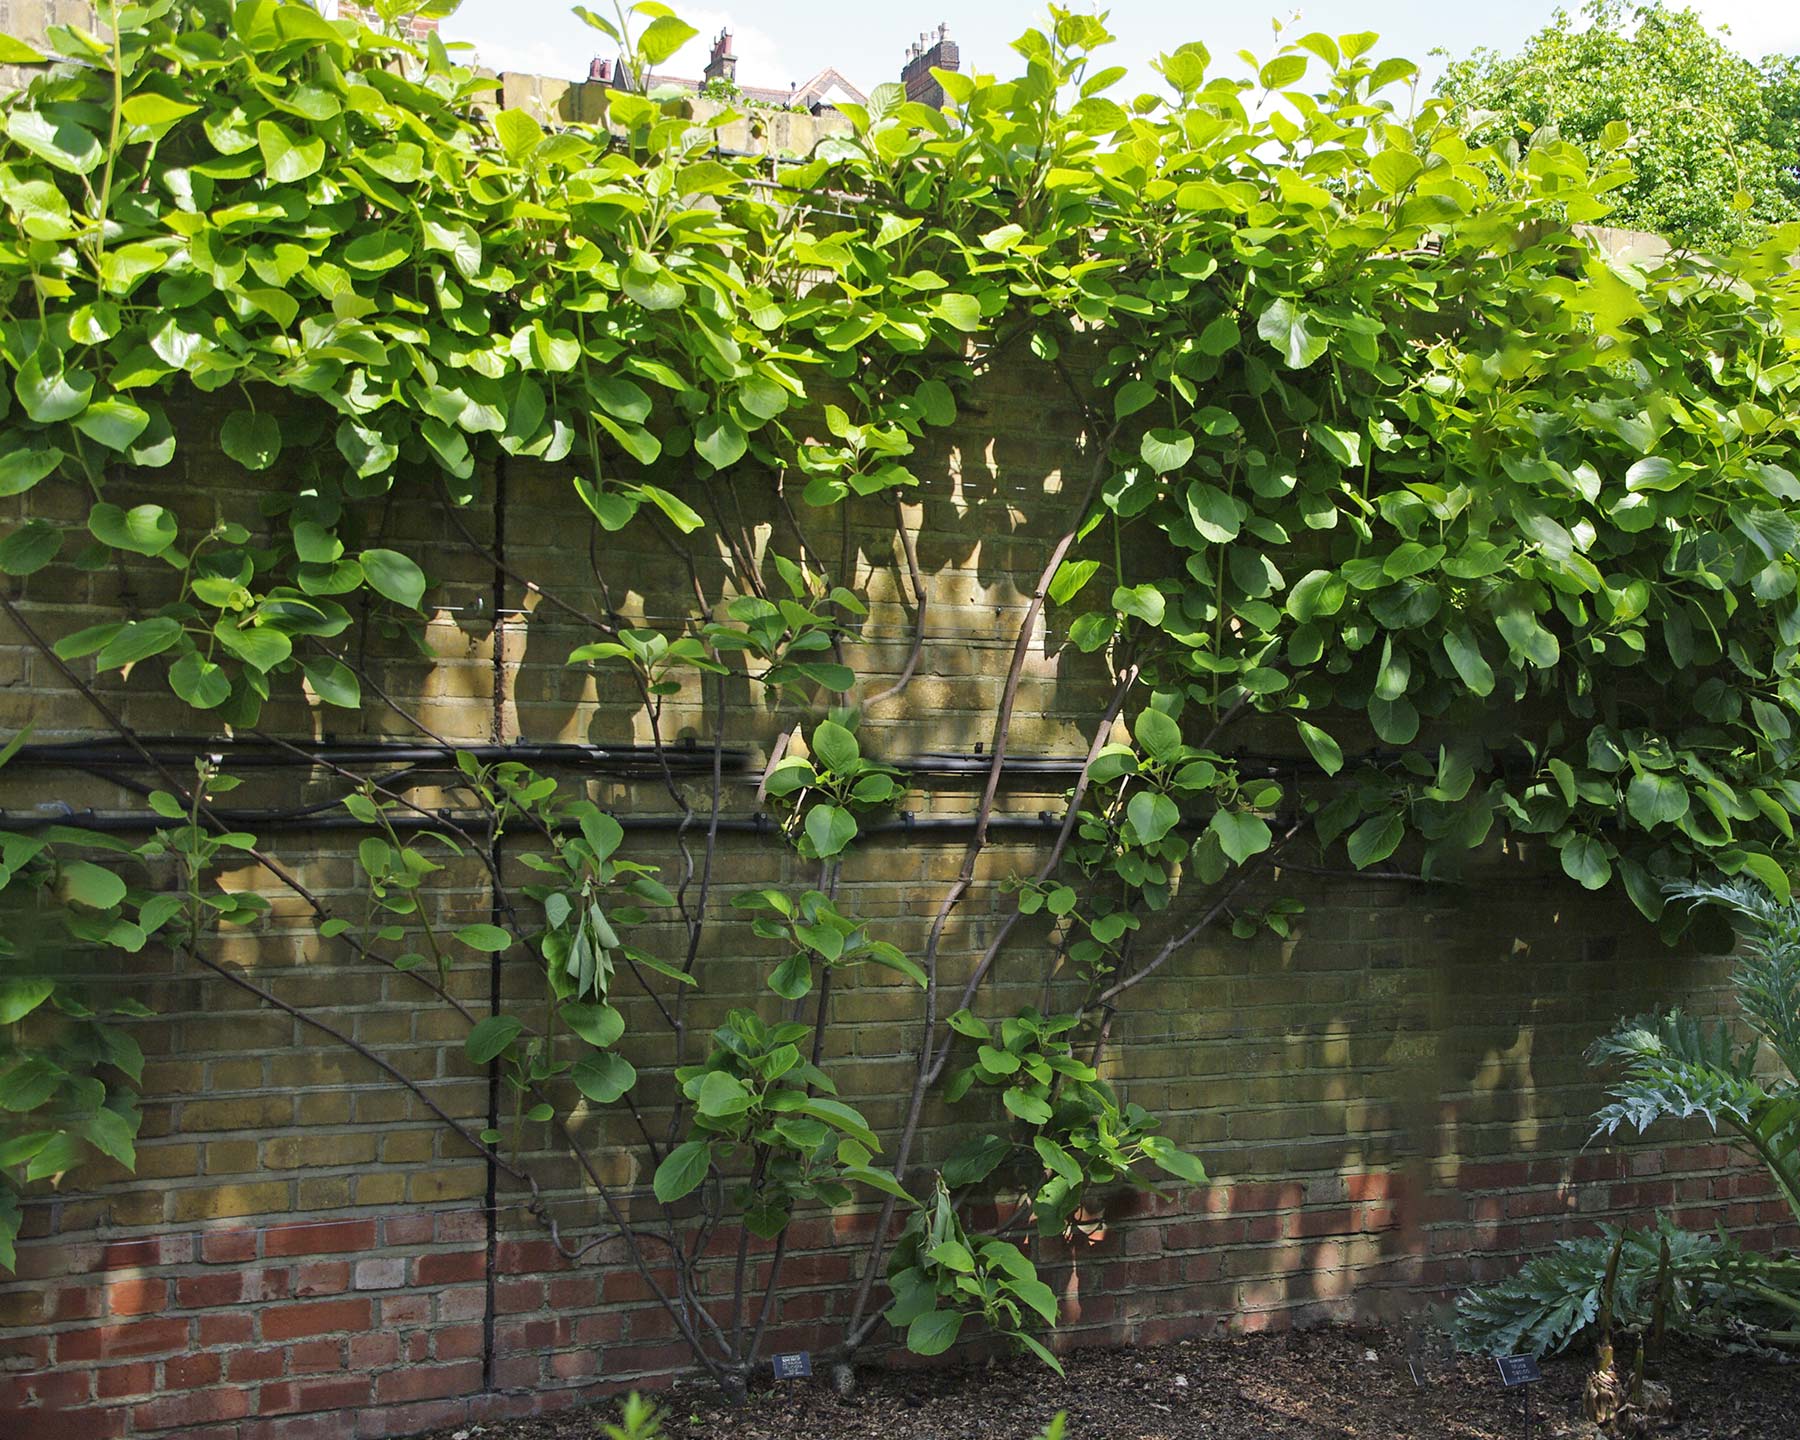 Actinidia deliciosa, Chinese Gooseberry or Kiwi Fruit makes a great wall cover